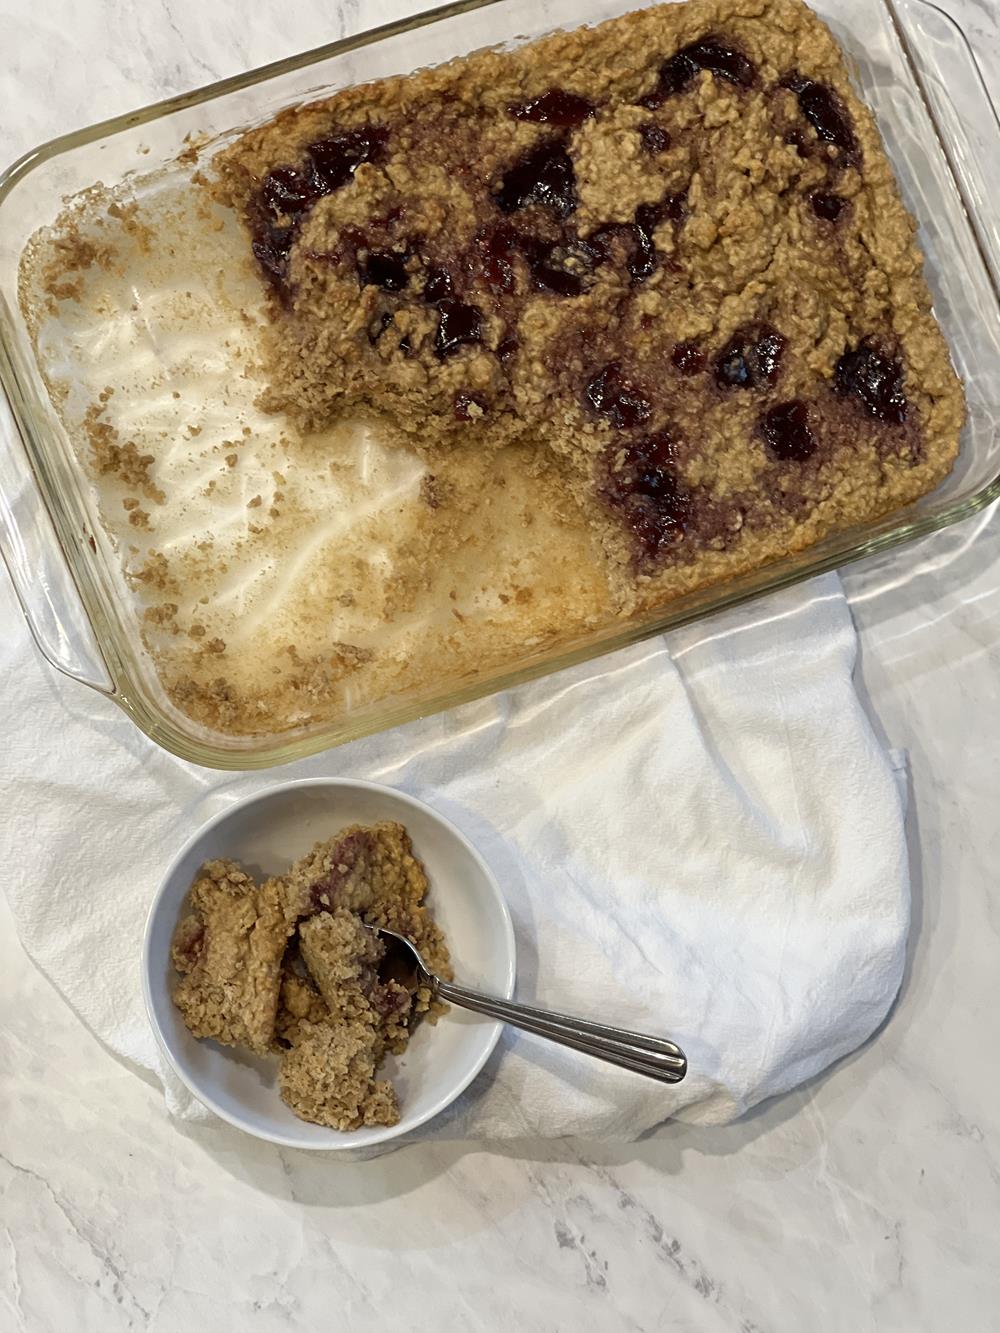 baked oatmeal in glass pan with some in a white bowl with spoon